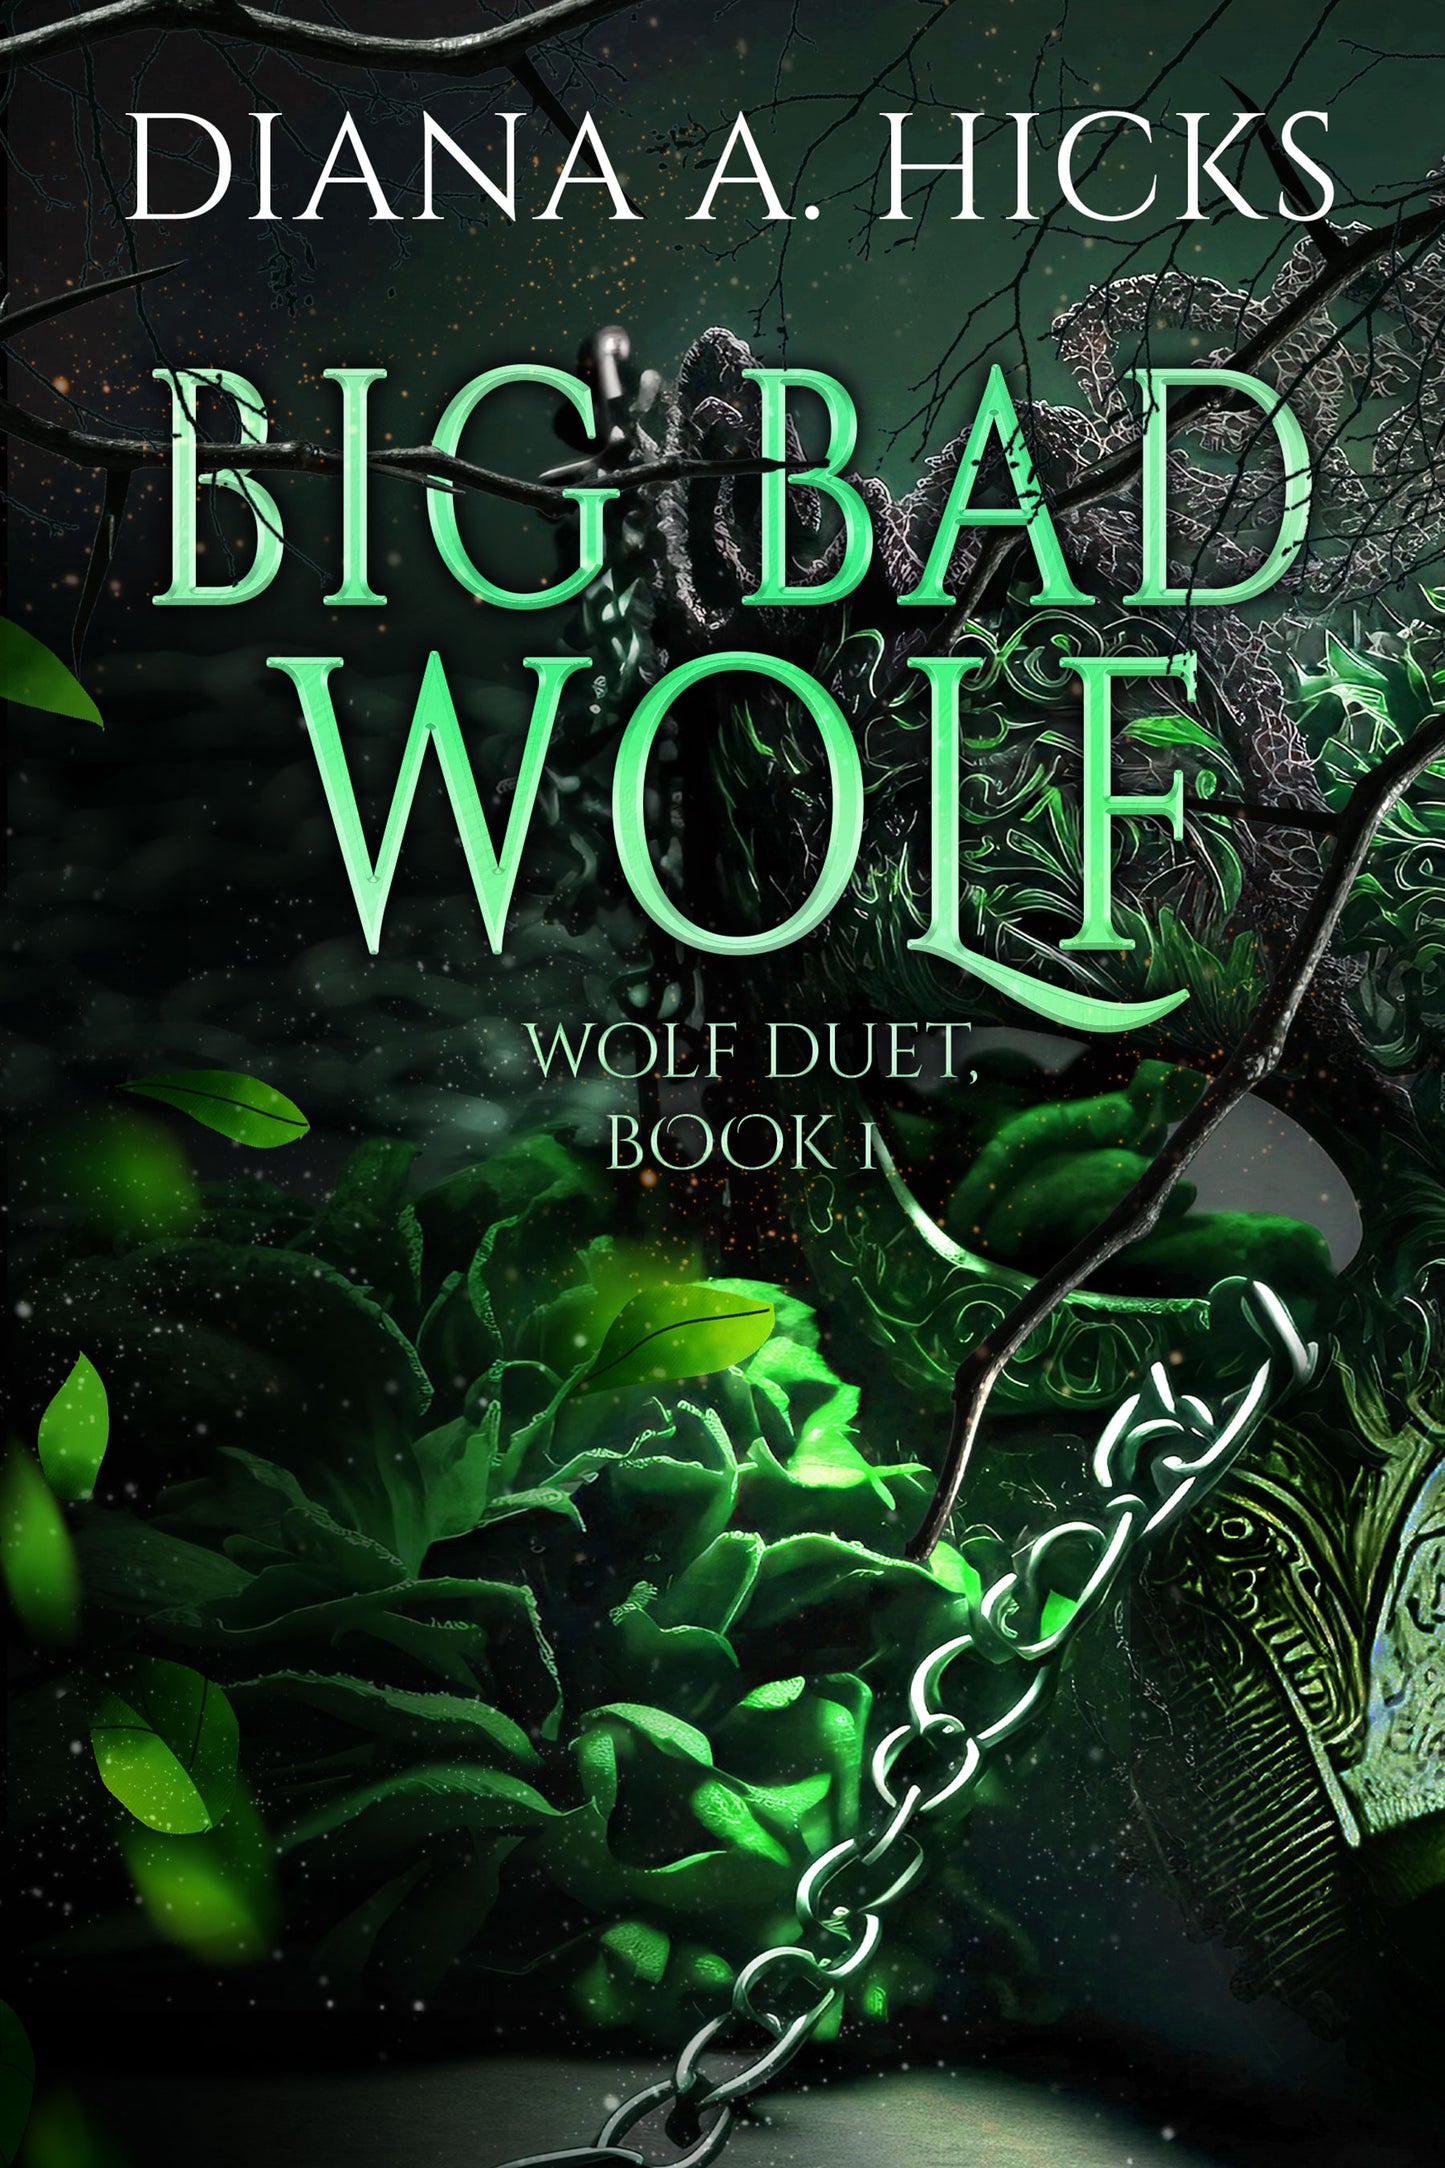 Big Bad Wolf: Special Edition Cover (The Society Book 3)